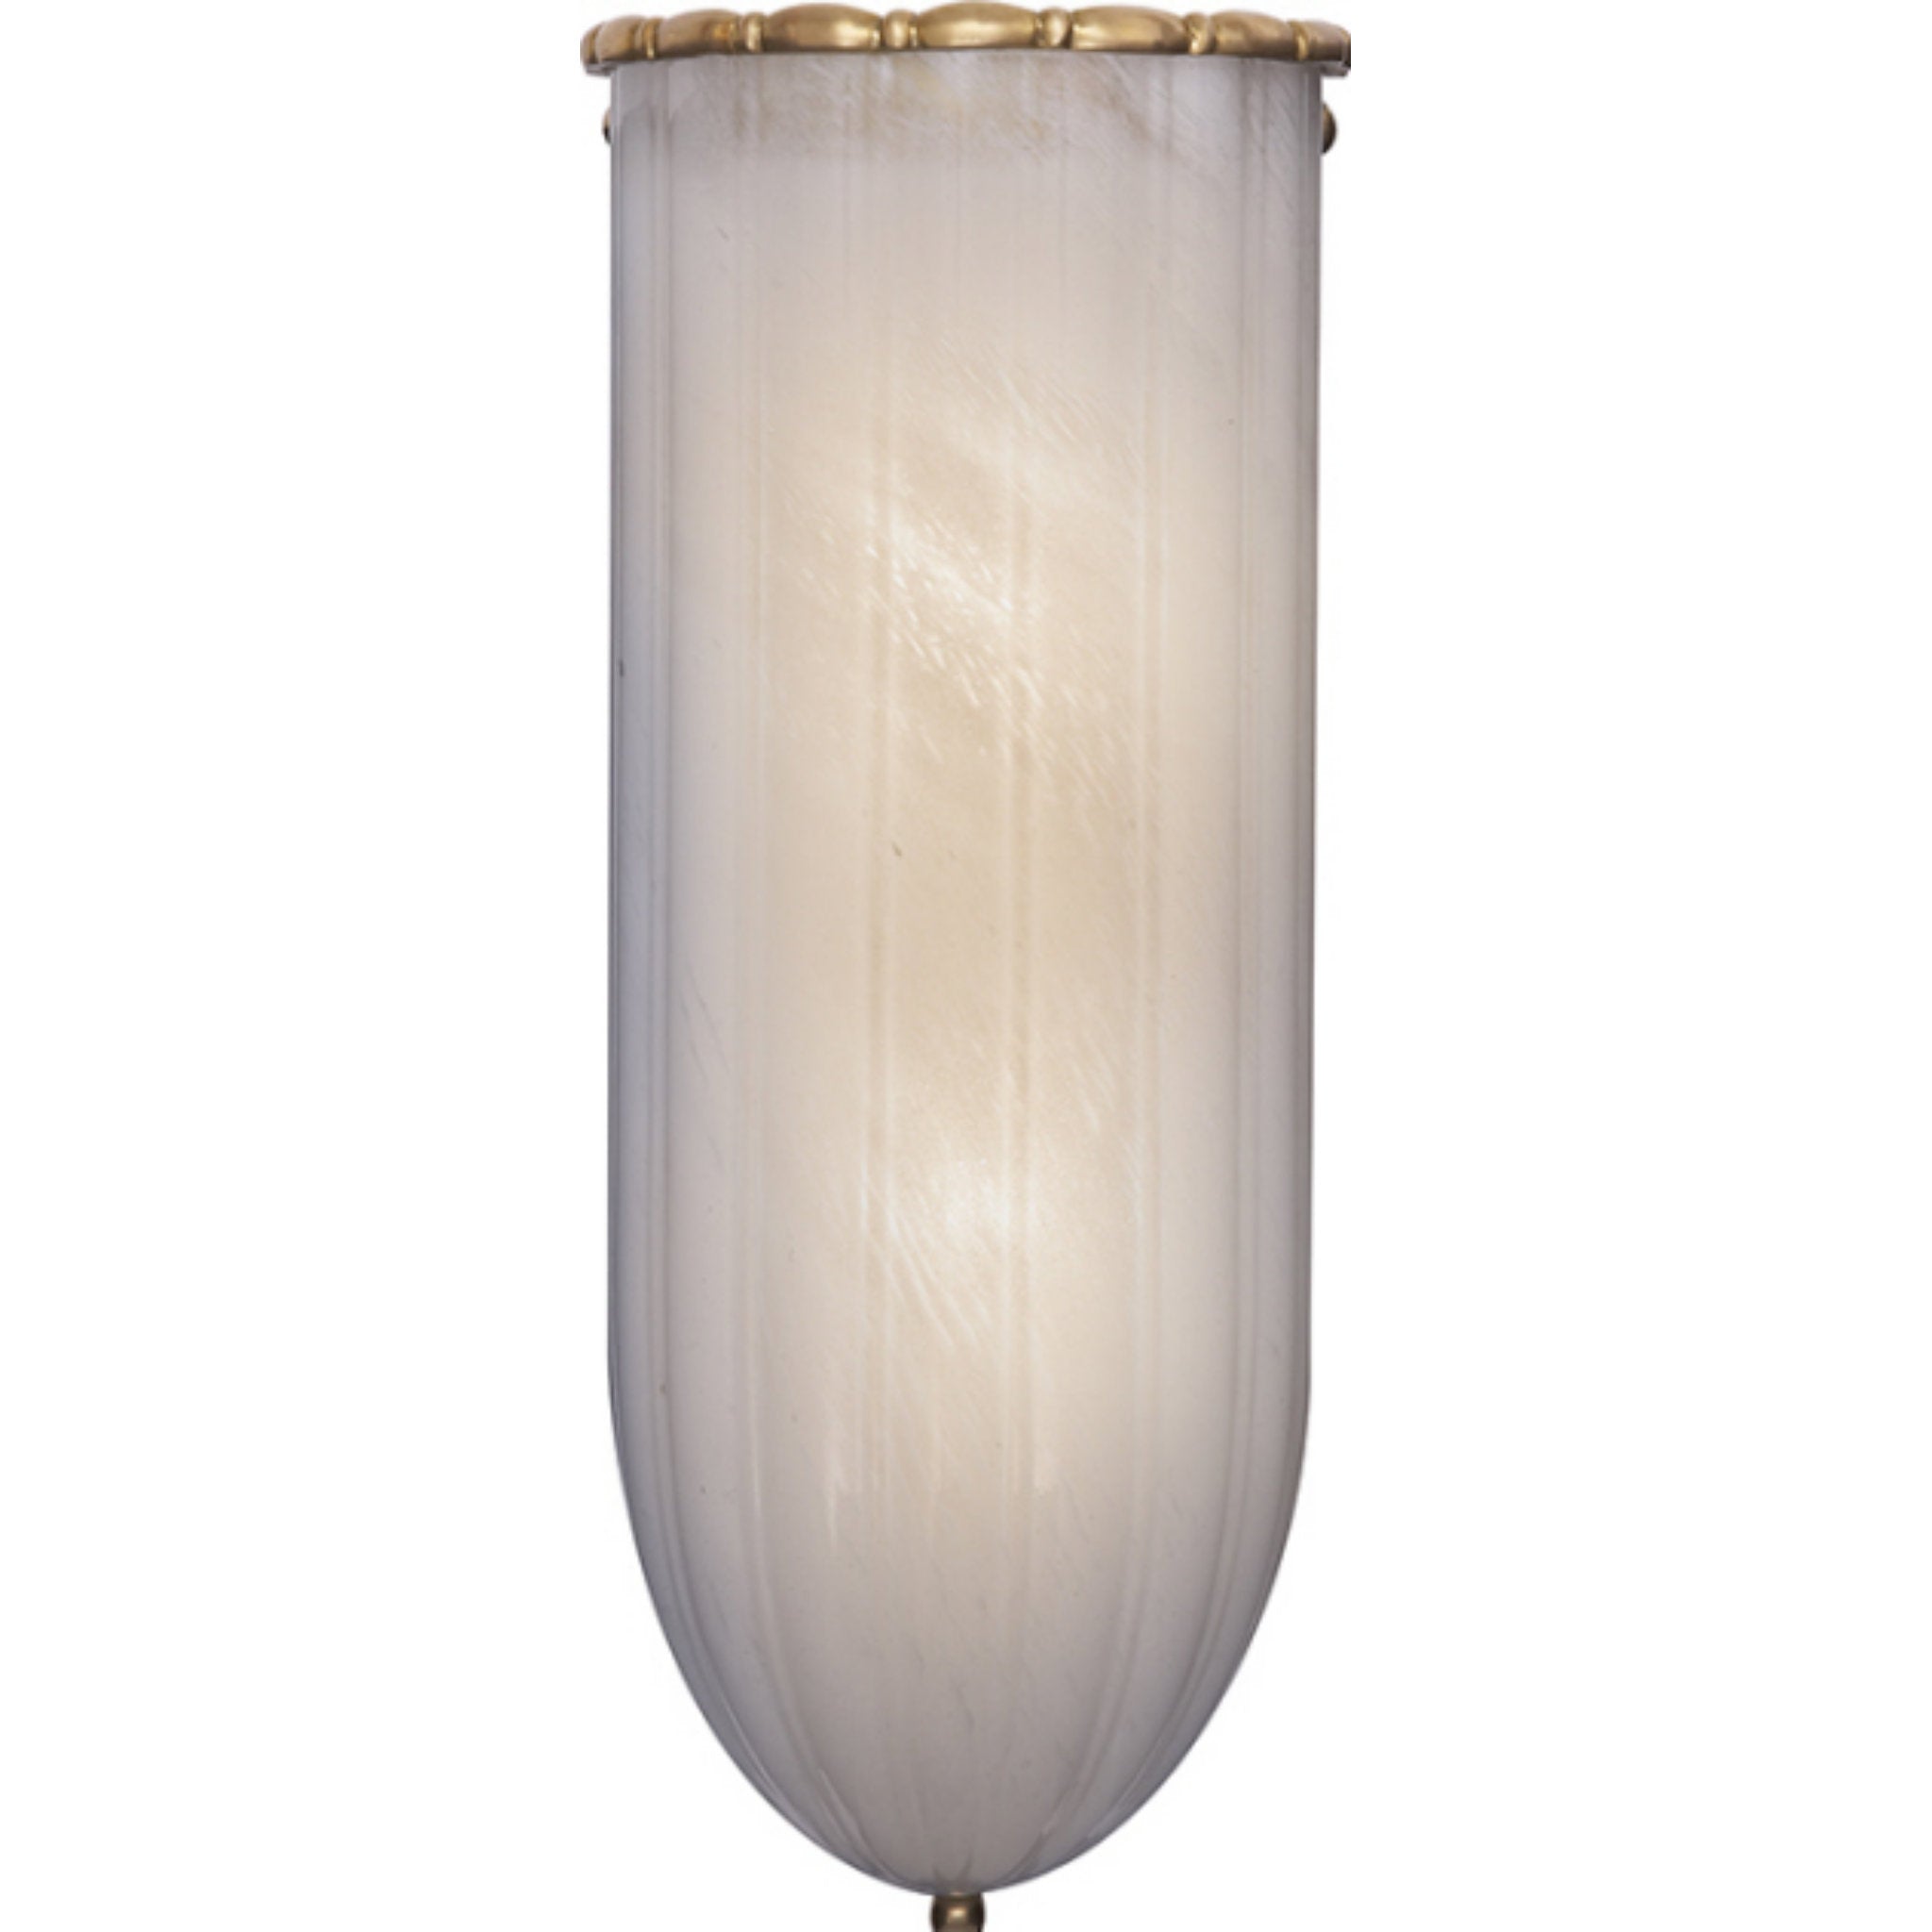 AERIN Rosehill Linear Wall Light in Hand-Rubbed Antique Brass with White Strie Glass